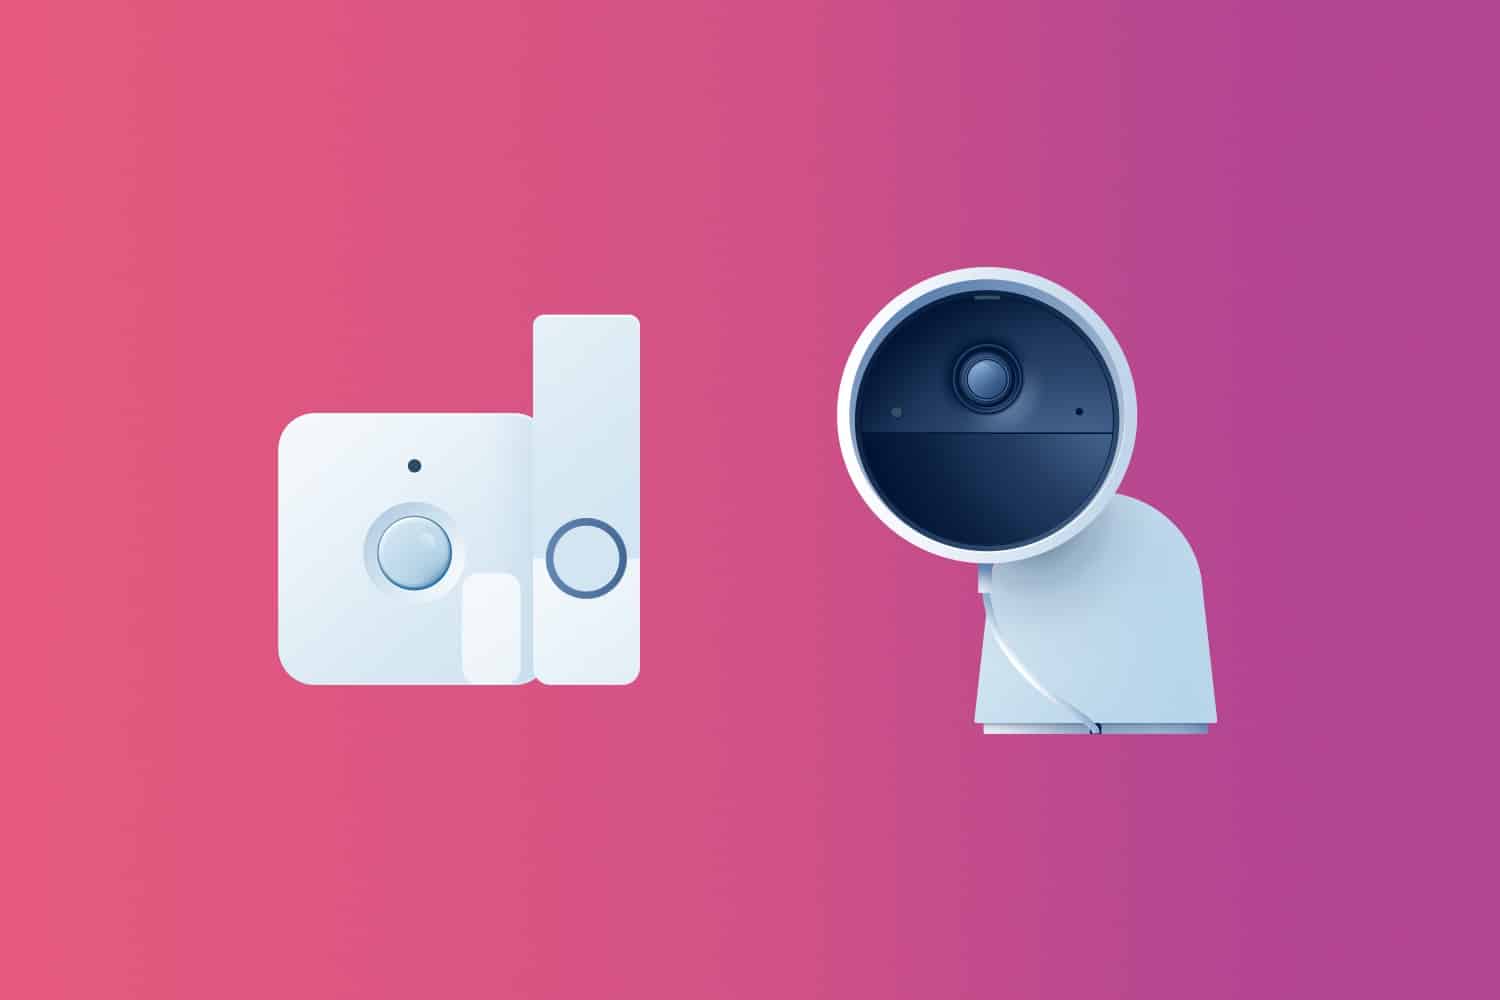 Hueblog: Hue Secure: The new security system from Philips Hue